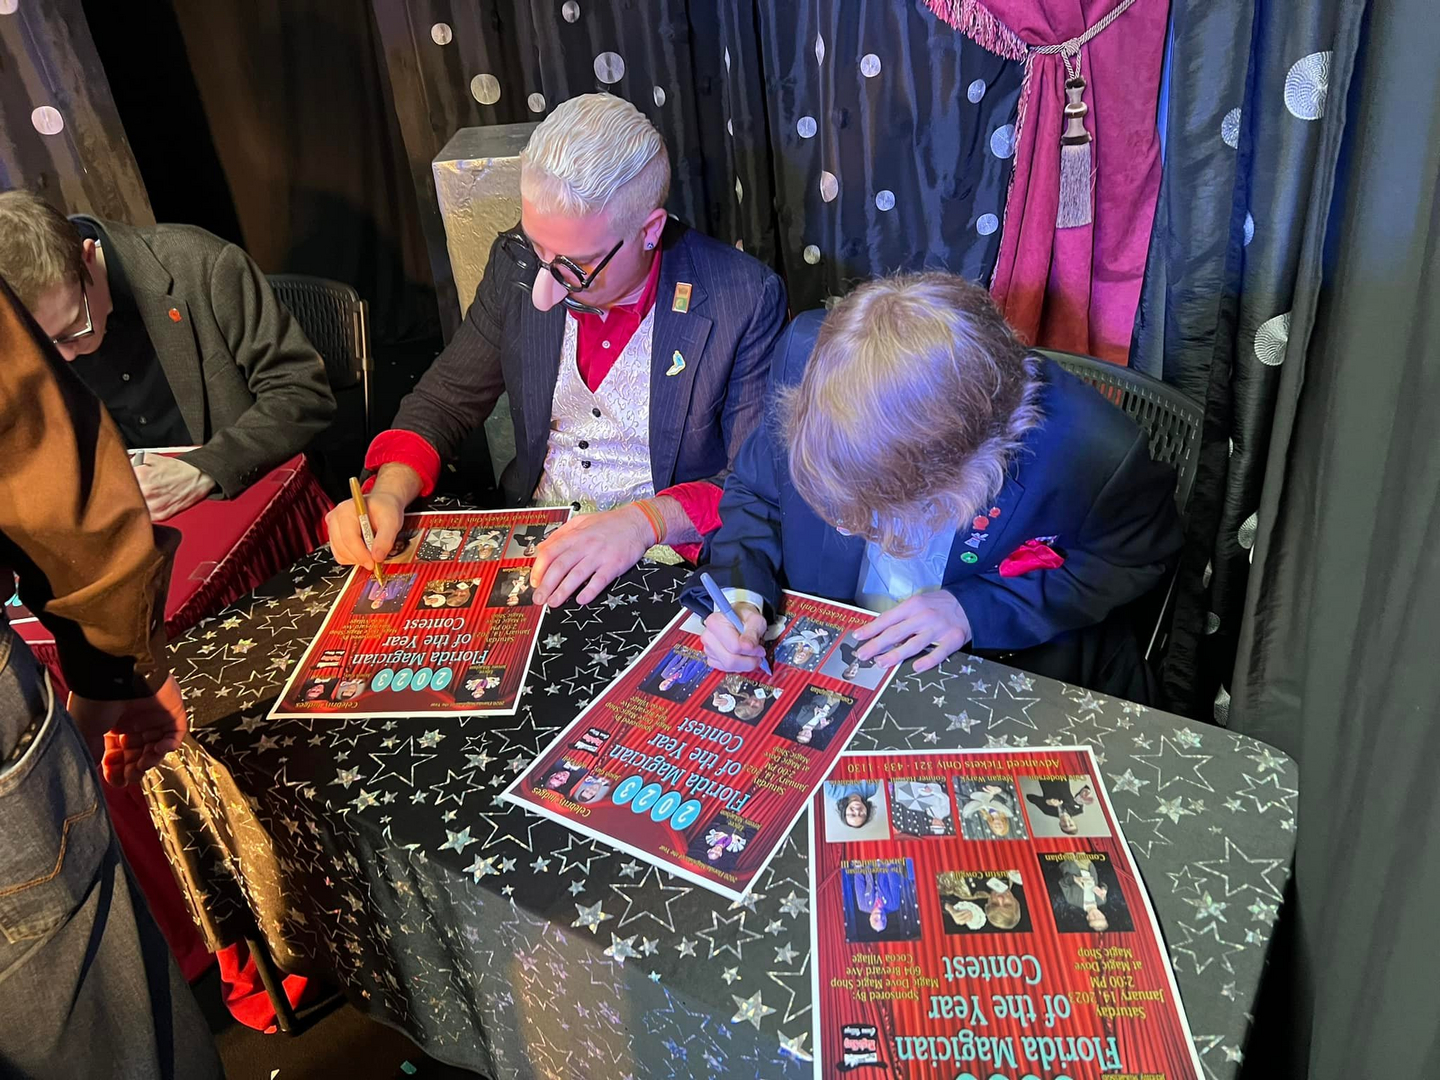 Two men signing posters at a table in front of a red curtain.